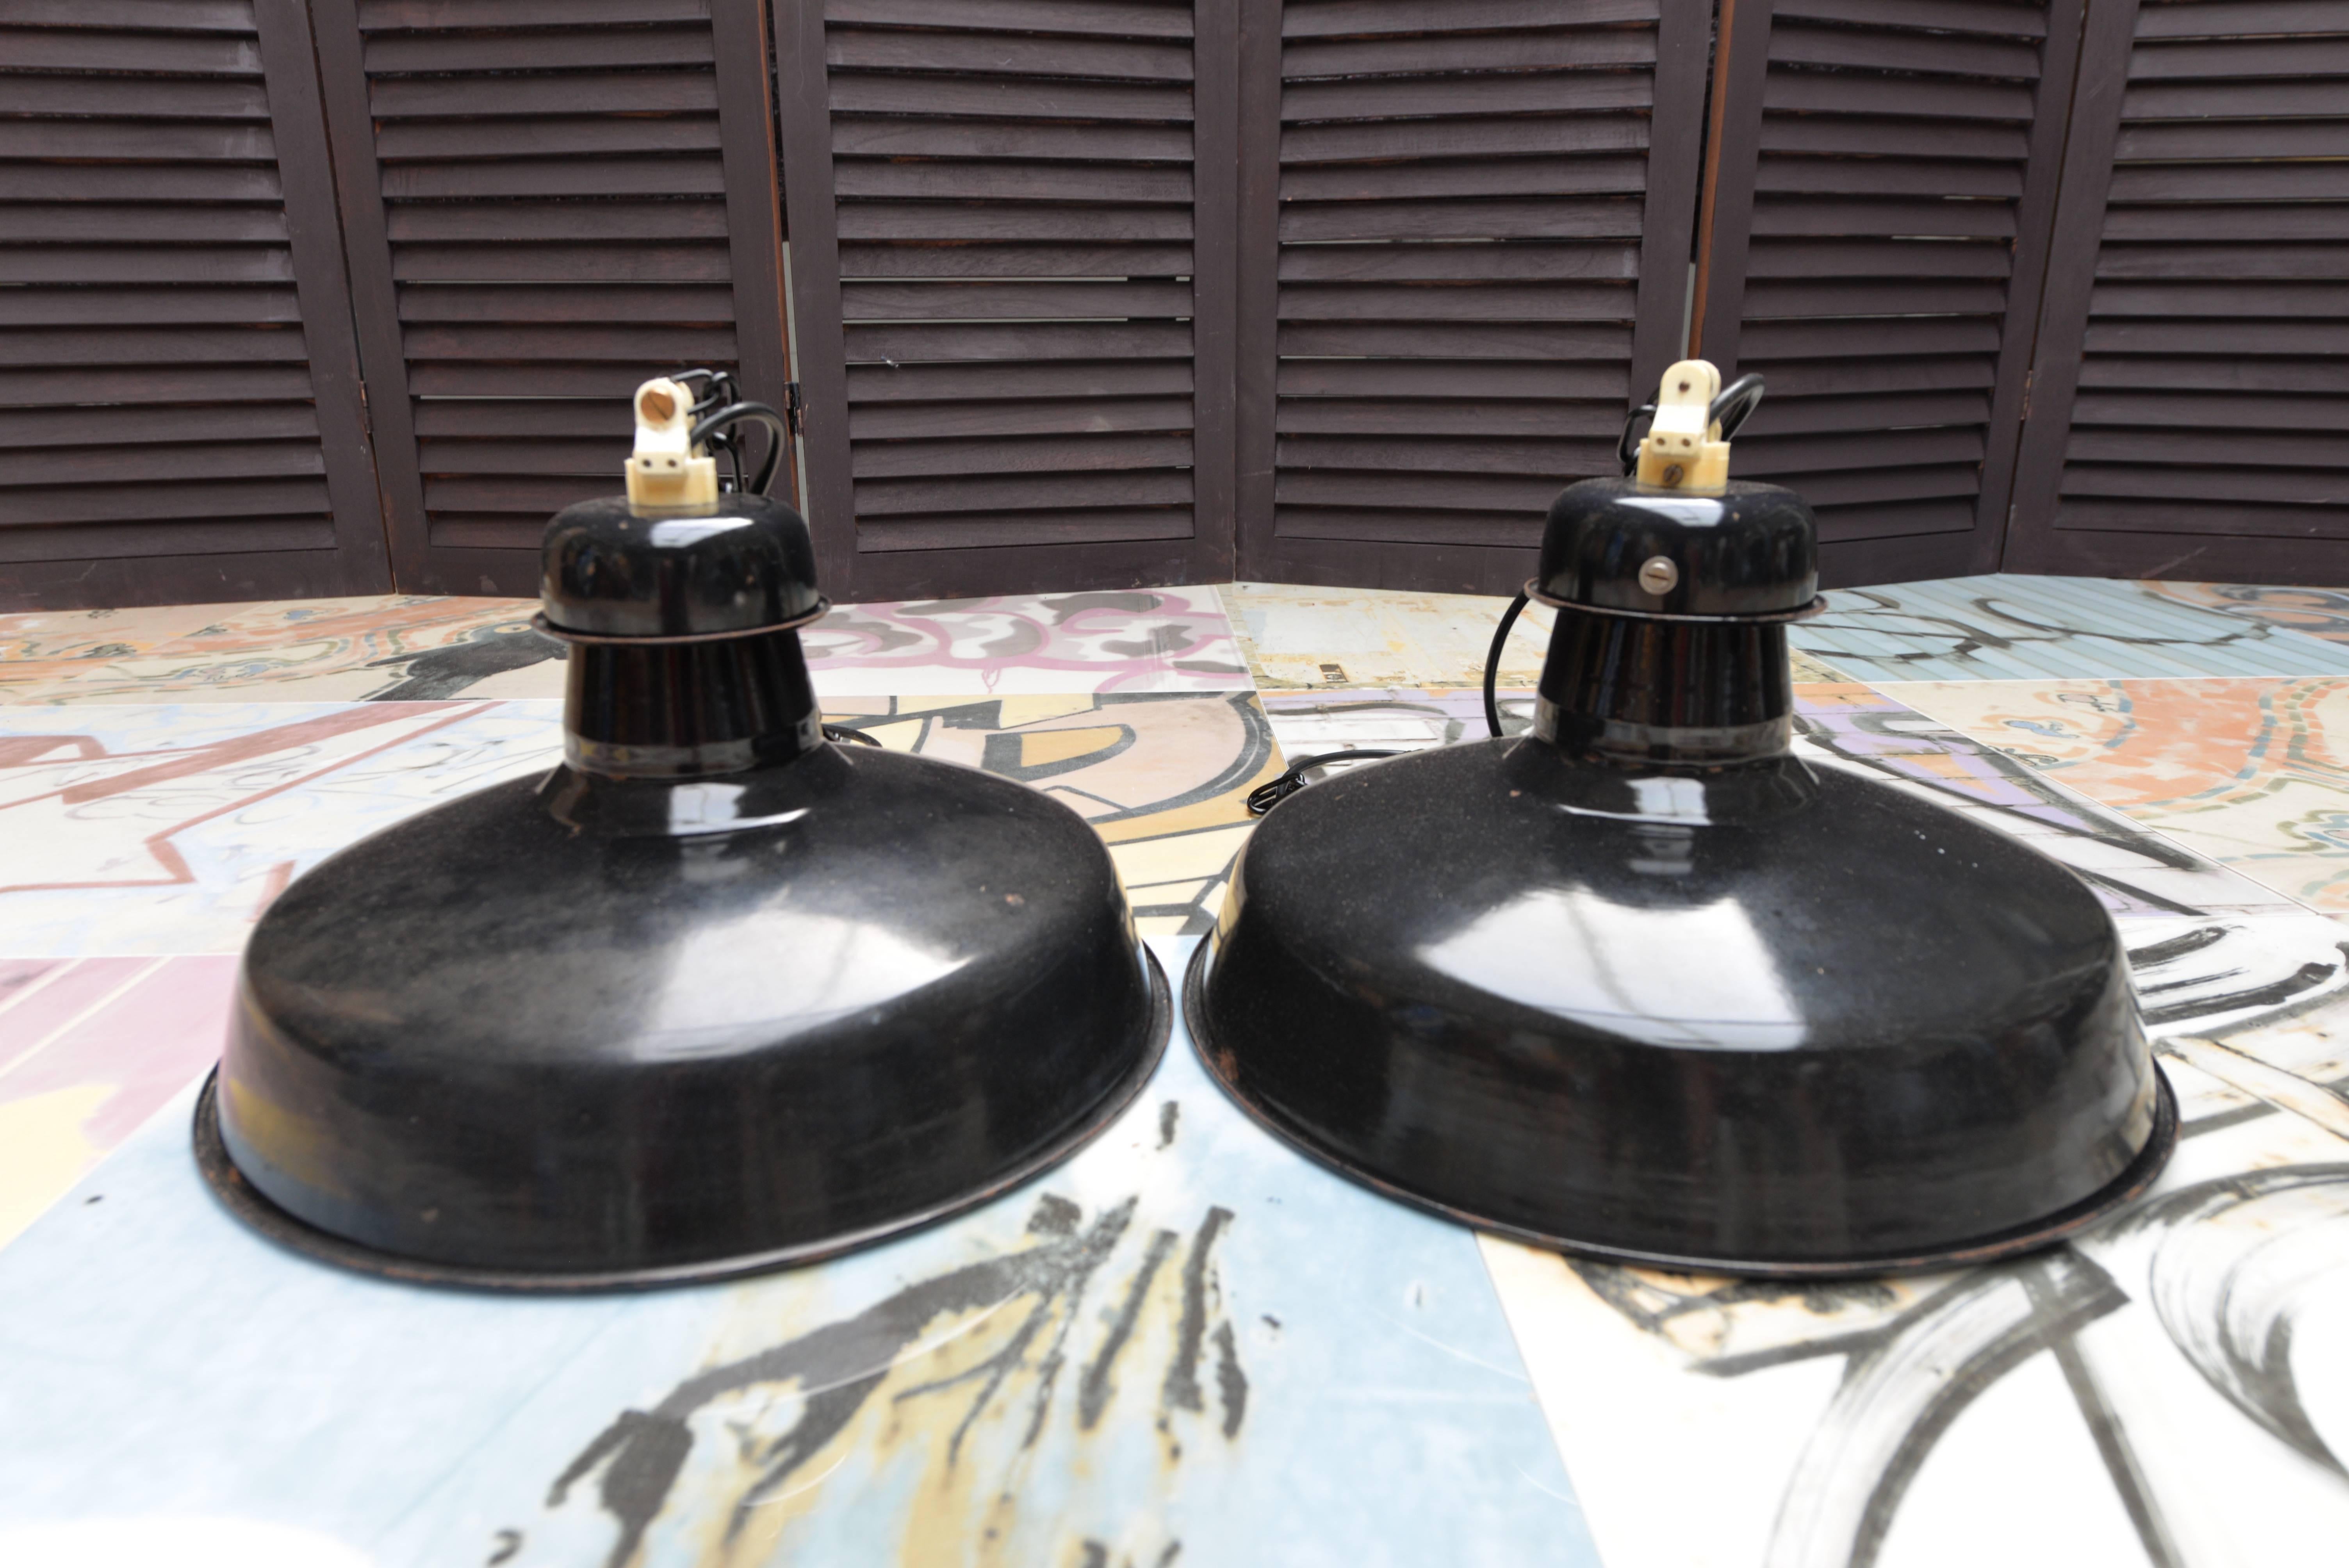 If shipped to the US or EU, no import tax applies. 

These black pendants have been cleaned, polished and rewired.

The bulb fittings are original ceramic and the pendants are supplied with suspension chains.